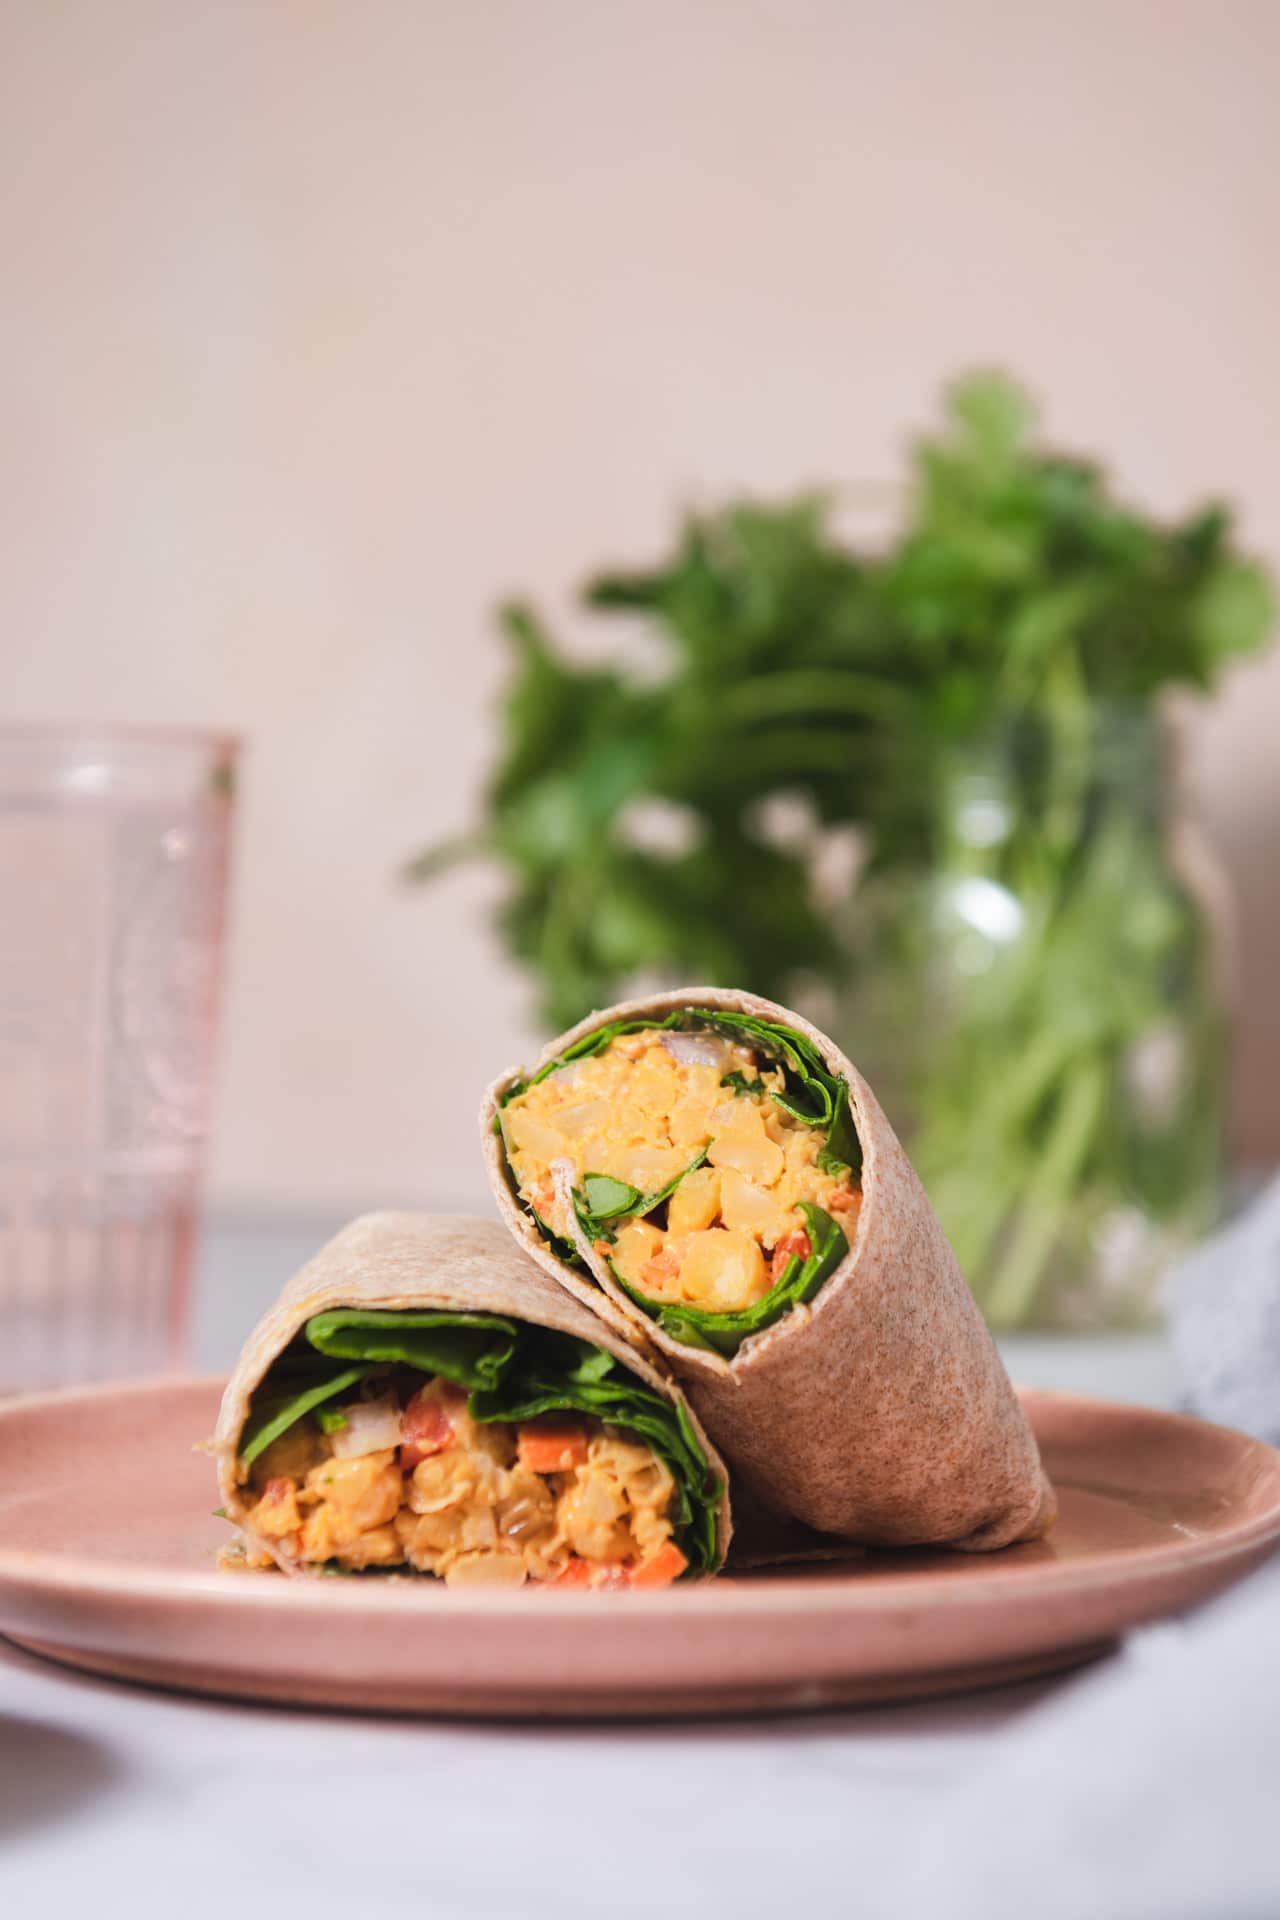 Two halves of a wrap on a pink plate with jar of cilantro in the background.